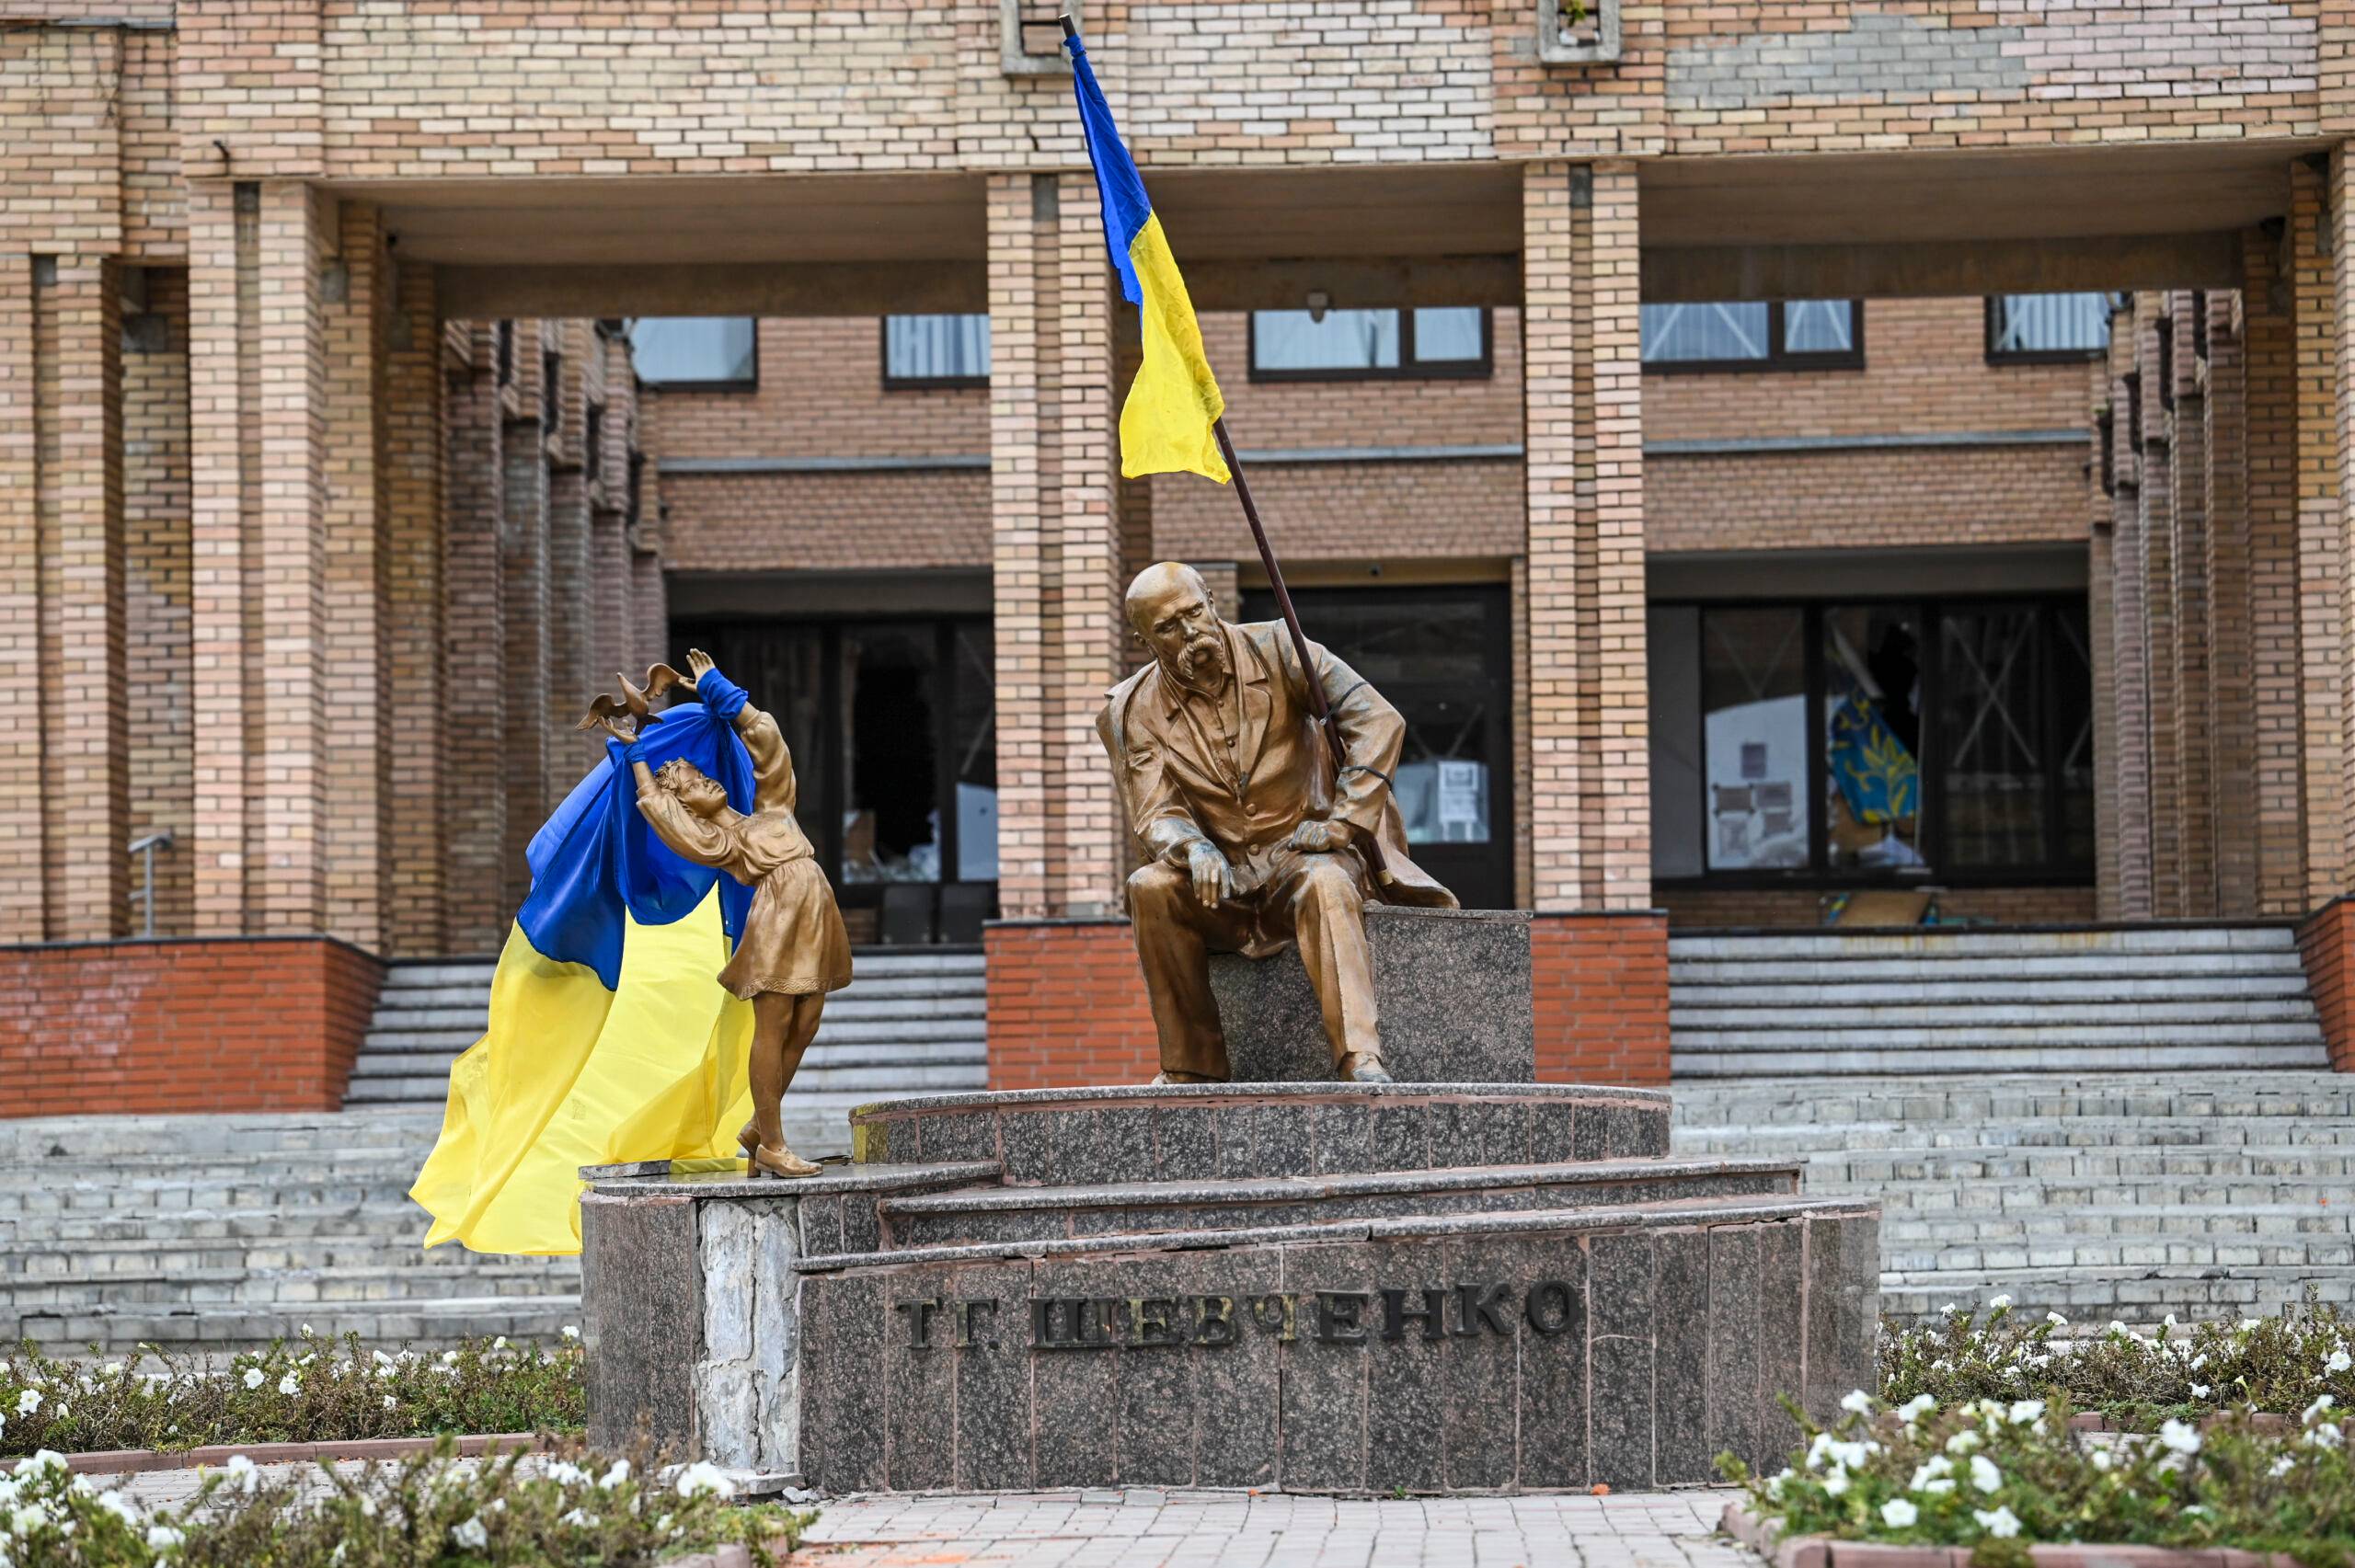 A photograph taken on September 10 , 2022, shows Ukrainian flags placed on statues in a square in Balakliya, Kharkiv region, amid the Russian invasion of Ukraine. - Ukrainian forces said on September 10, 2022 they had entered the town of Kupiansk in eastern Ukraine, dislodging Russian troops from a key logistics hub in a lightning counter-offensive that has seen swathes of territory recaptured. (Photo by Juan BARRETO / AFP)